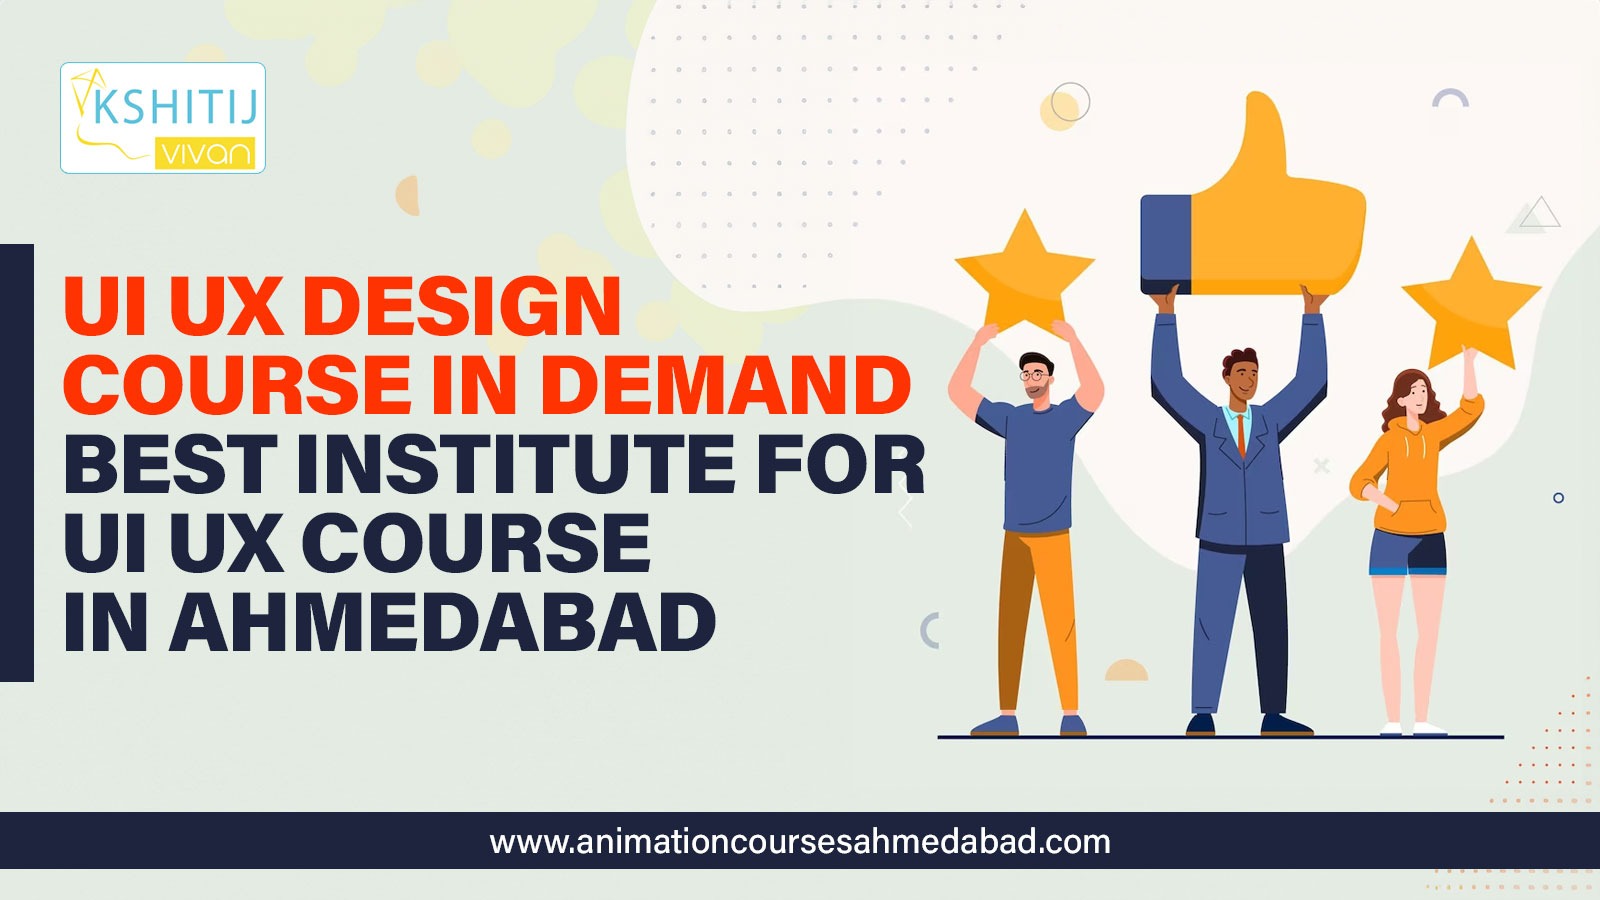 UI UX Design Course in demand Best Institute for Course in Ahmedabad